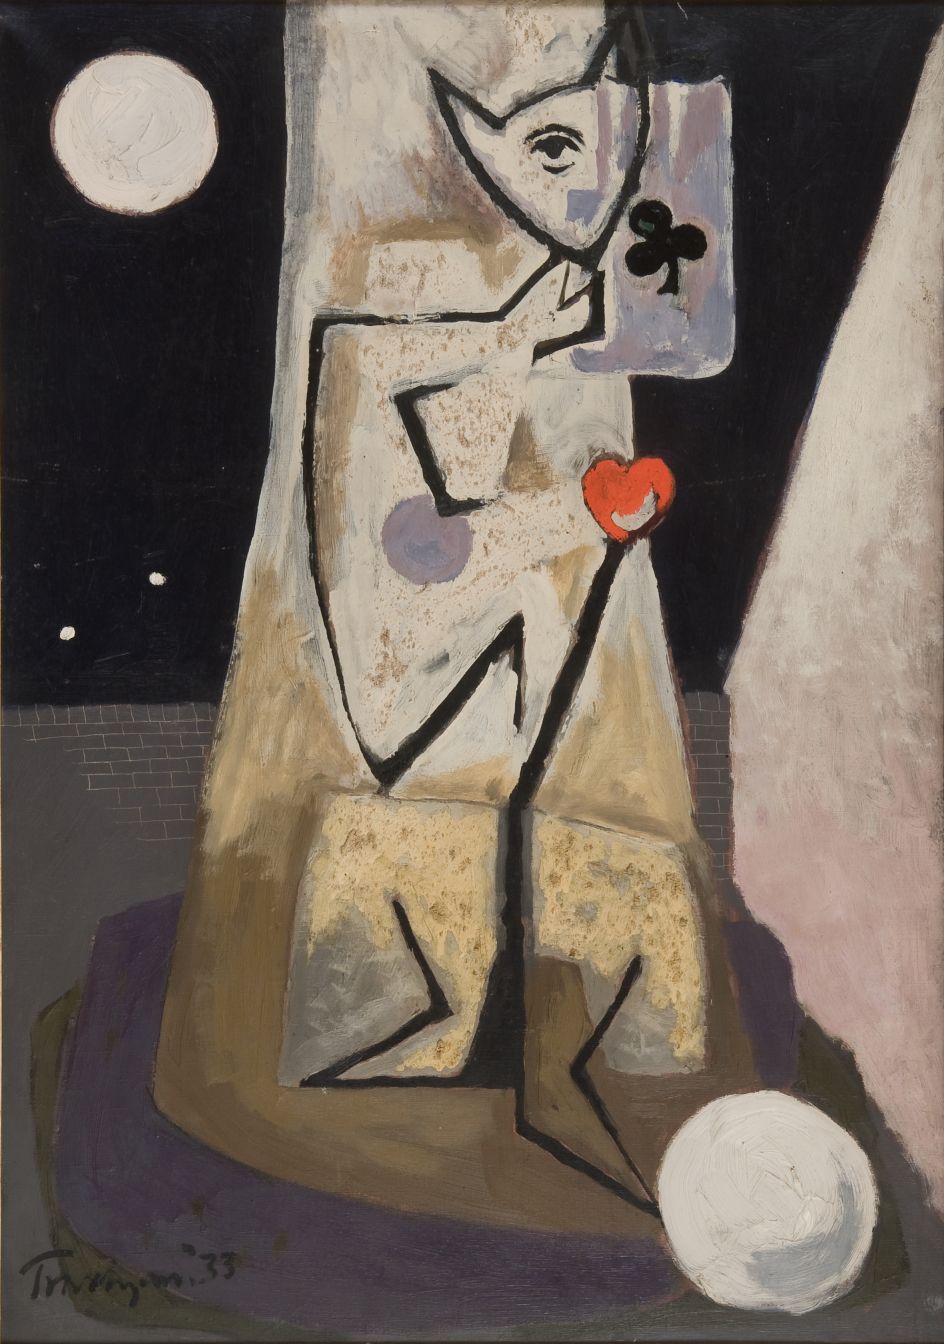 Julian Trevelyan, Standing Figure with Ace of Clubs, 1933, oil on canvas, Photograph Mike Fear, courtesy Jerwood Collection © The Julian Trevelyan Estate